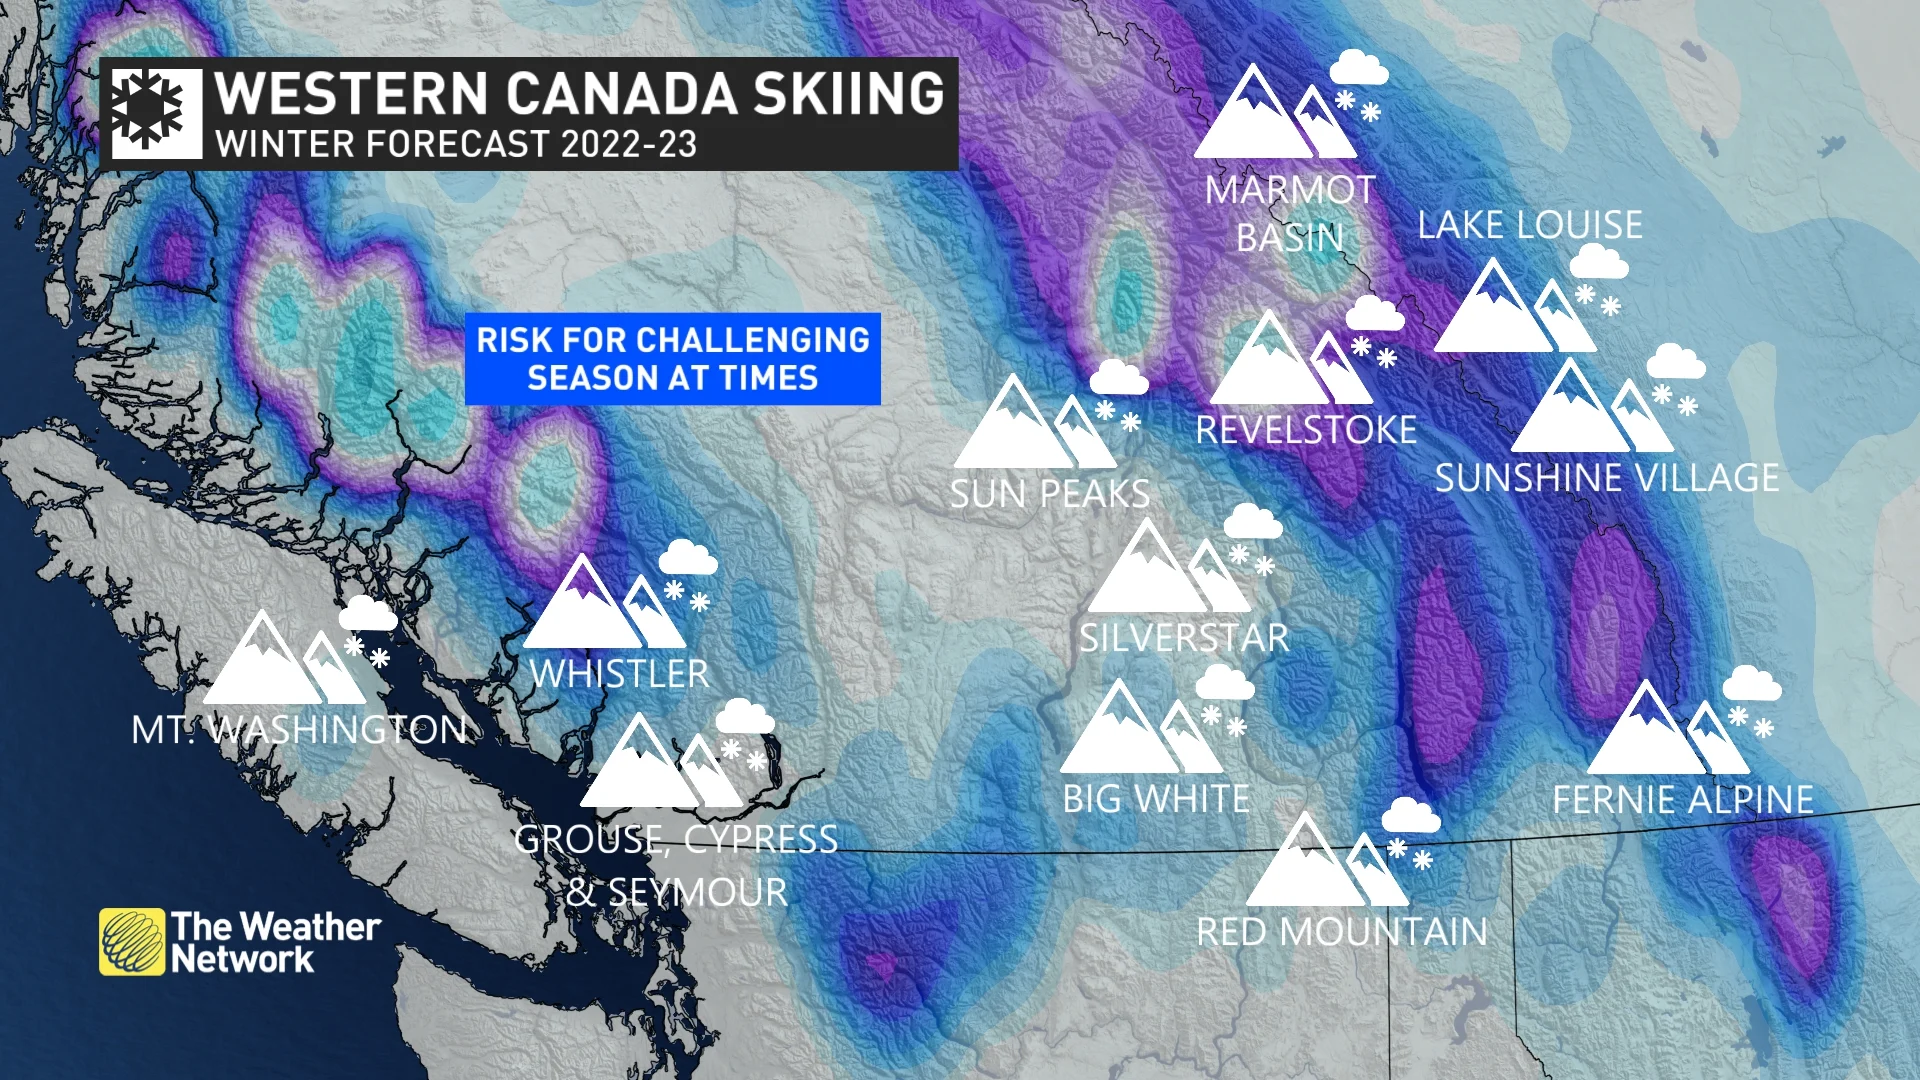 WINTER FORECAST: Western Canada ski resorts face challenging times with lack of snow